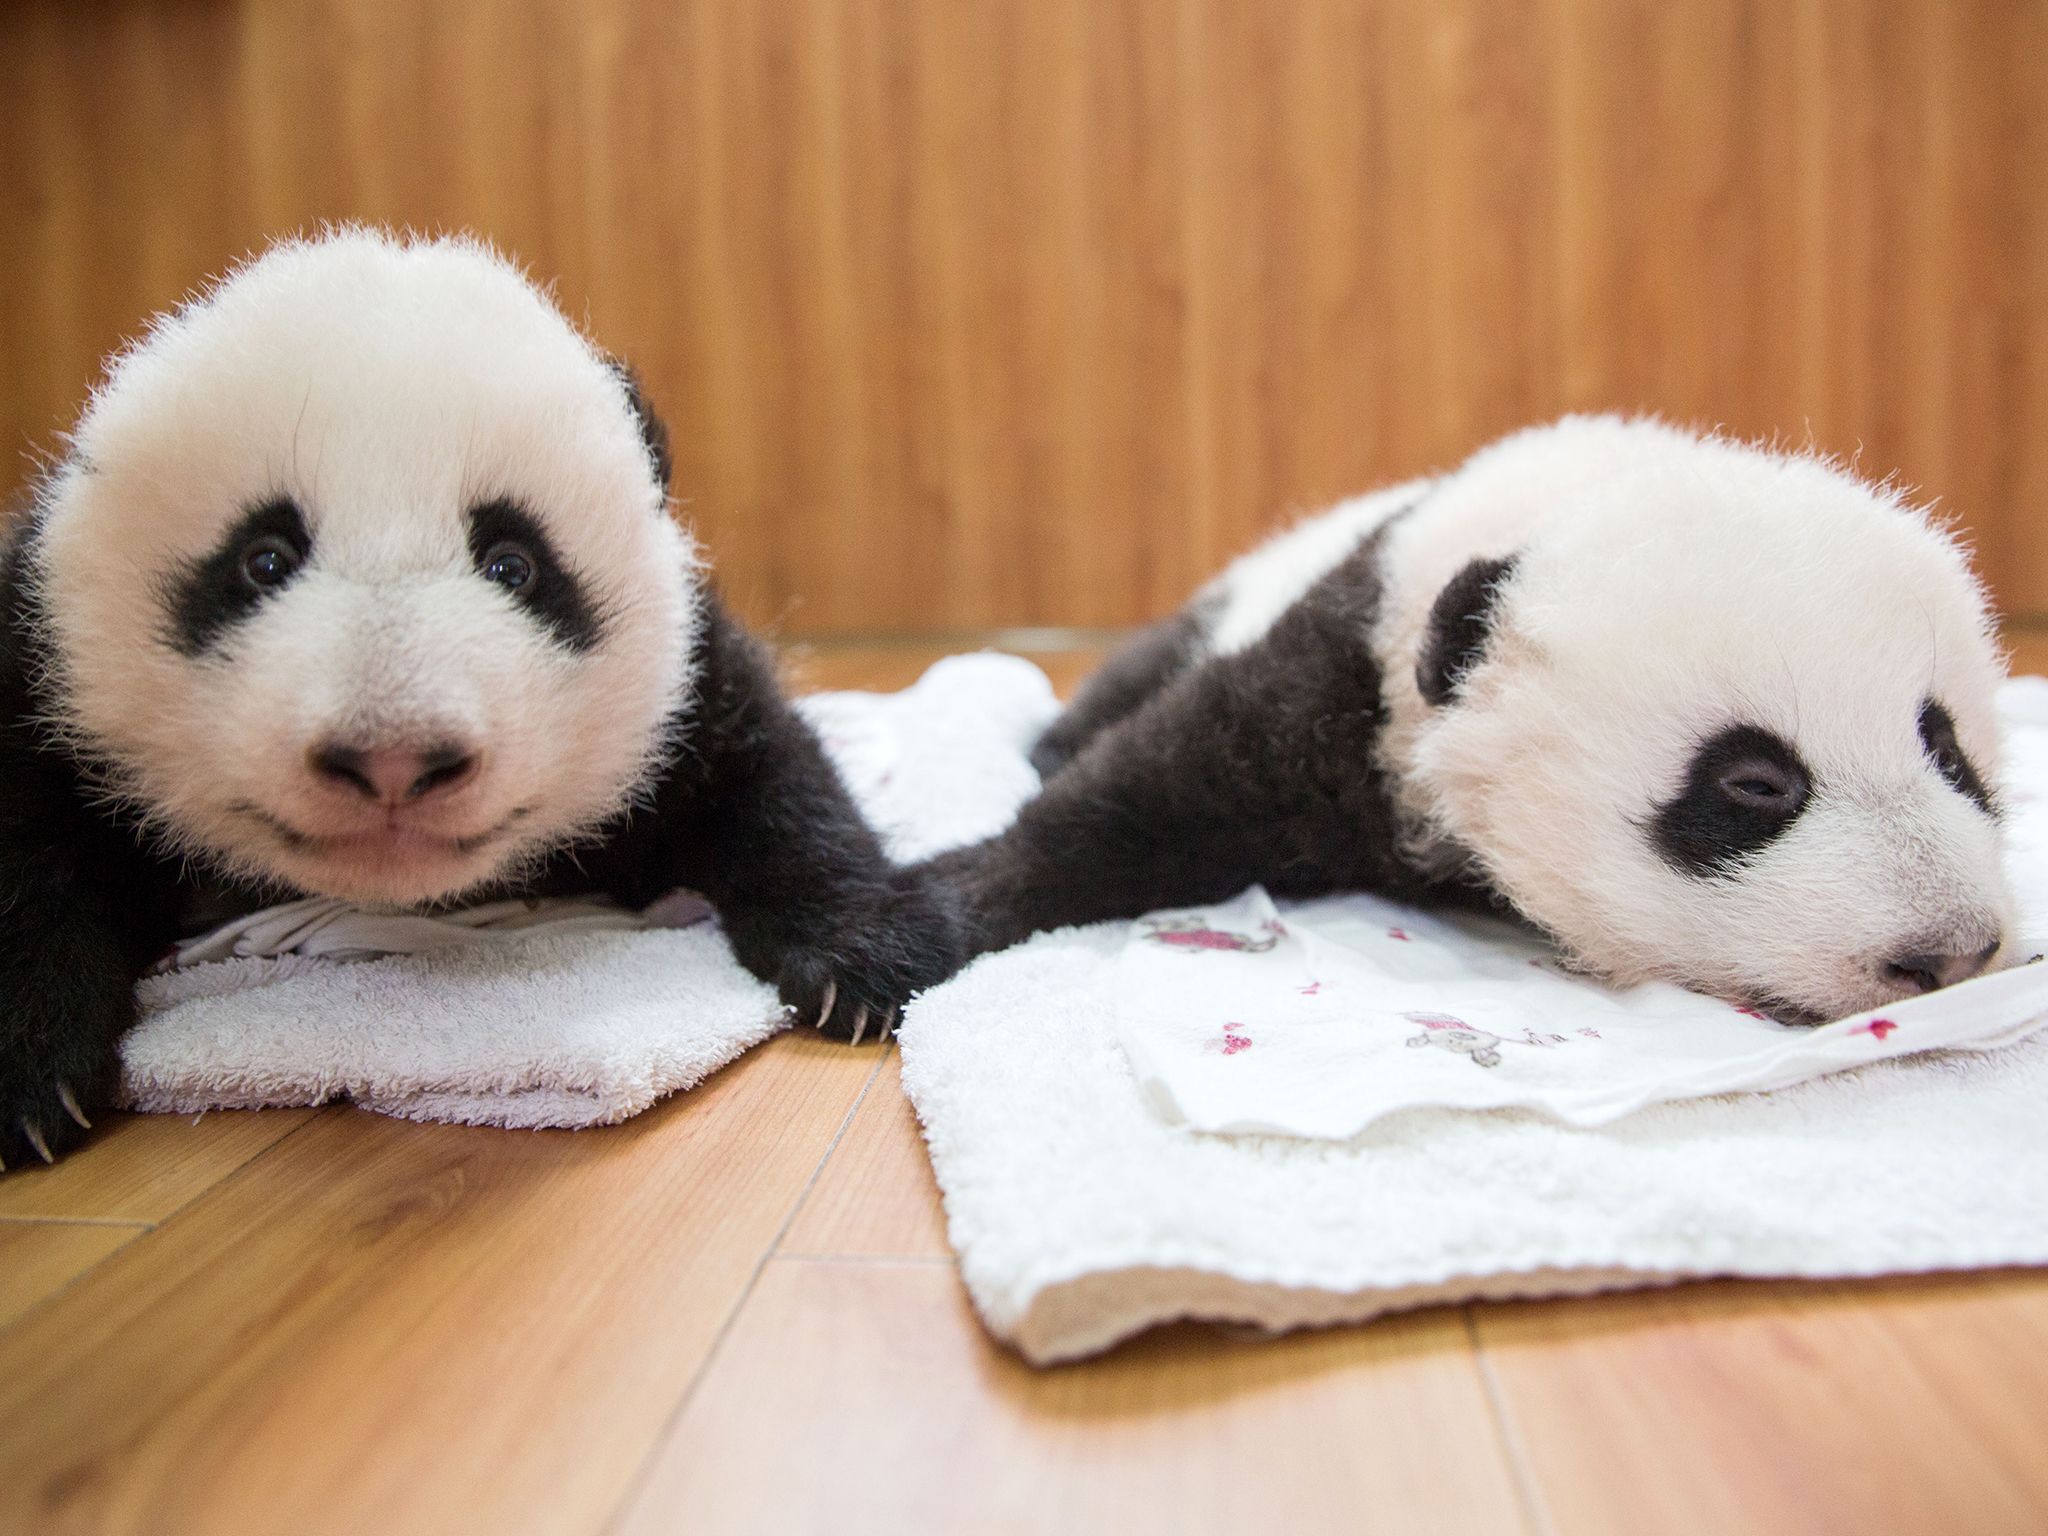 Baby Pandas at Wolong Panda Reserve. This image is from Panda Babies. [Photo of the day - July 2016]